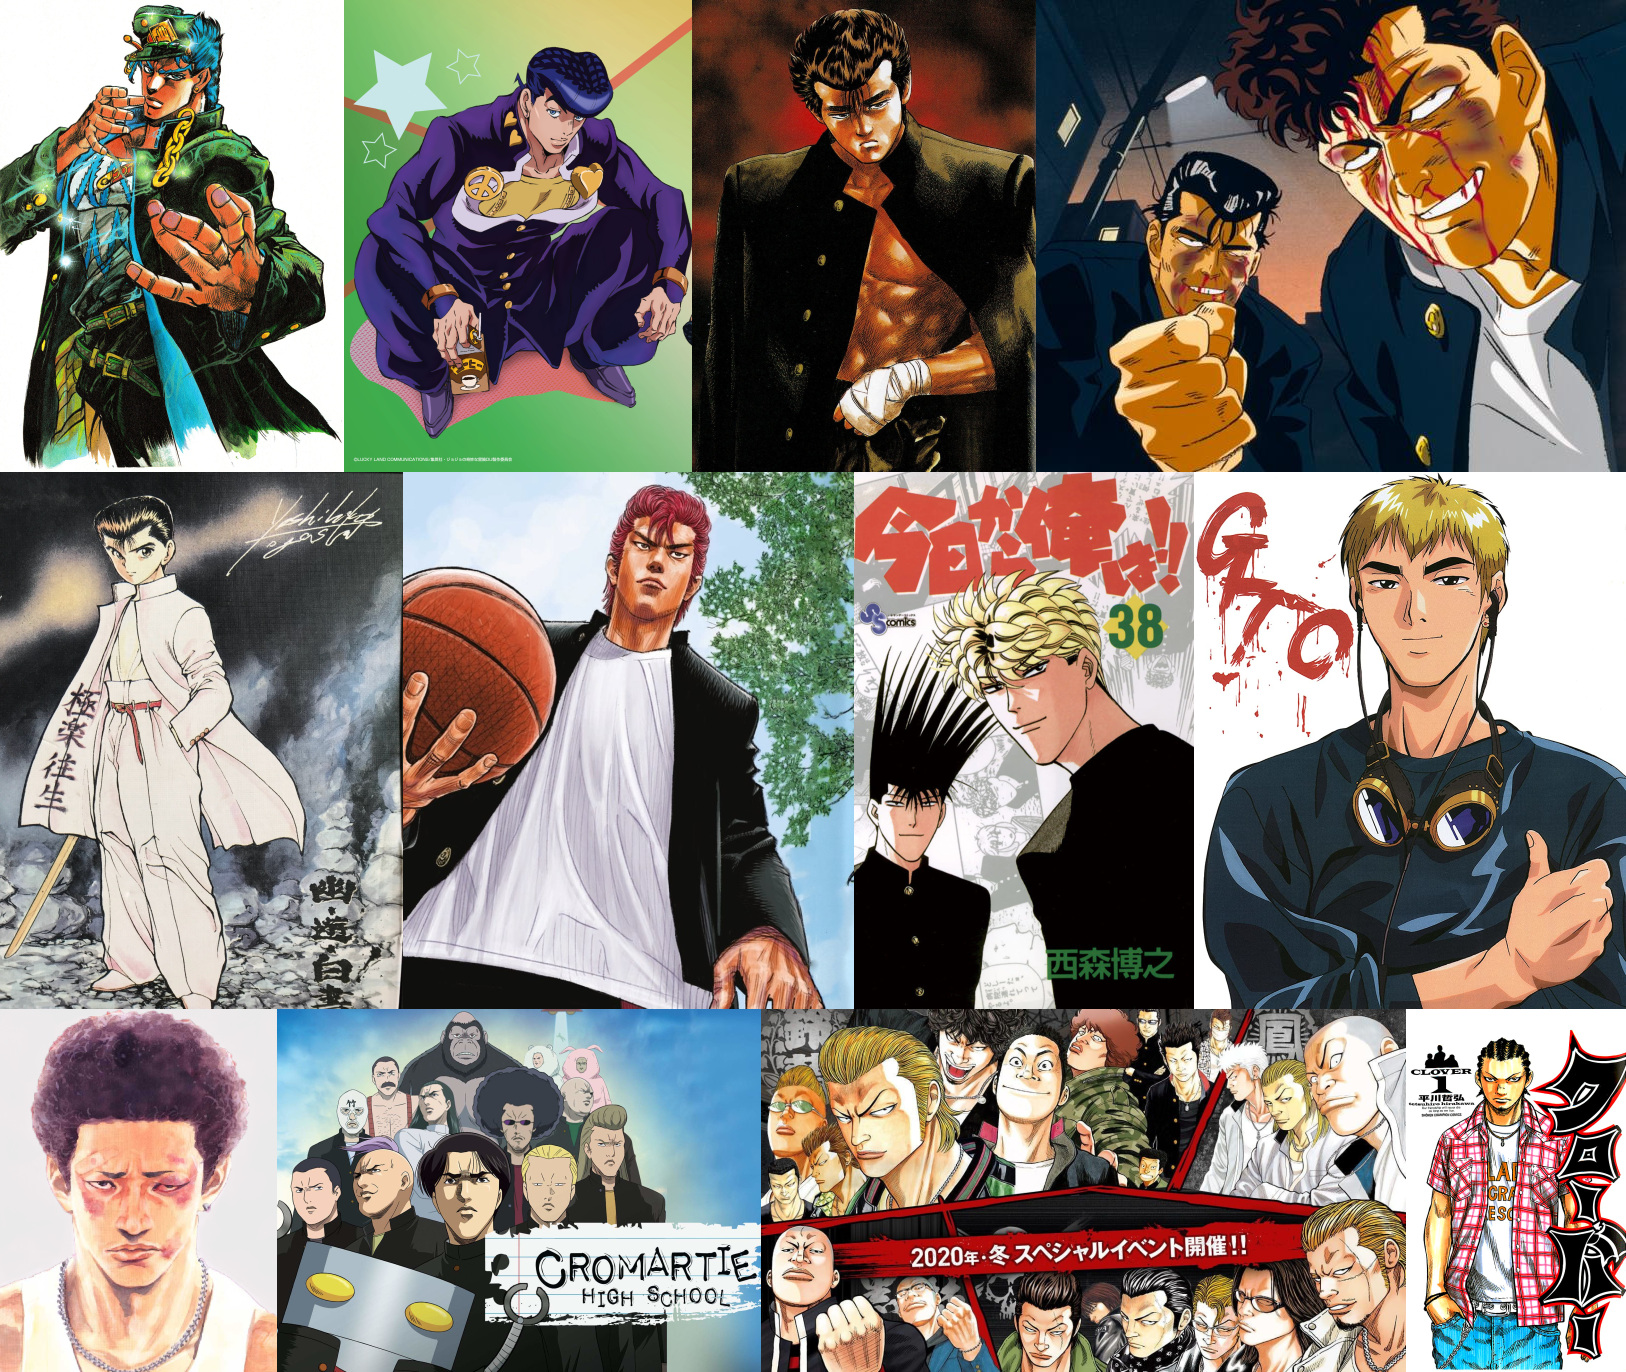 12 Of The Best Delinquent Anime Characters You'll Ever Lay Eyes On